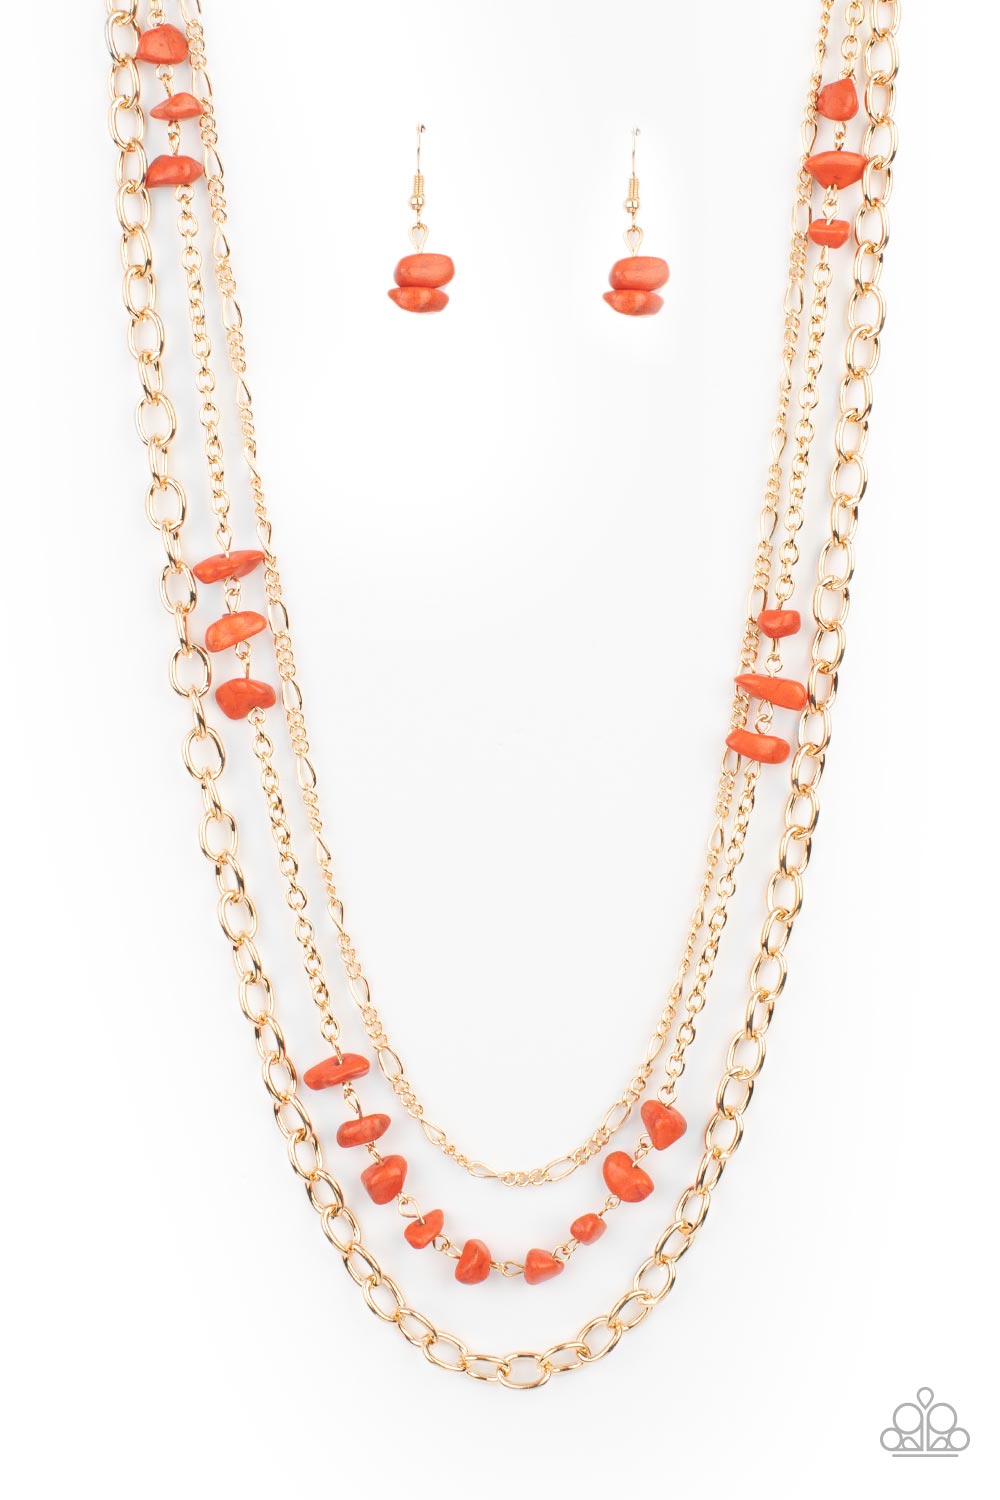 Artisinal Abundance - Orange Stone Necklaces infused with sections of refreshing orange stones, a trio of mismatched gold chains layer down the chest for a dash of earthy refinement. Features an adjustable clasp closure.  Sold as one individual necklace. Includes one pair of matching earrings.